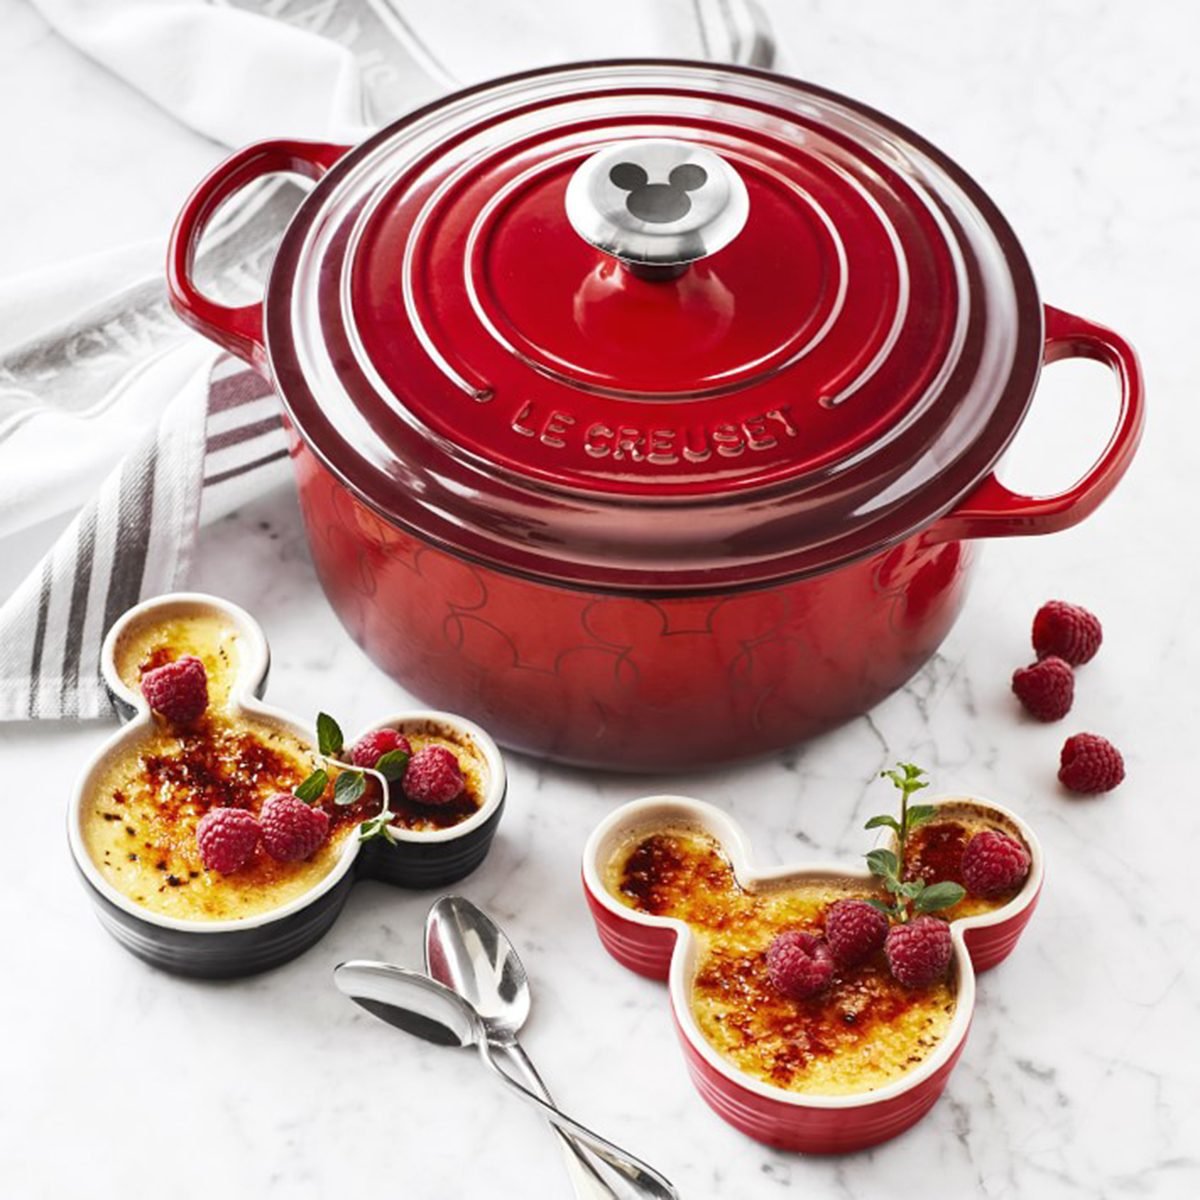 https://www.tasteofhome.com/wp-content/uploads/2020/06/le-creuset-mickey-mouse-90th-birthday-celebration-cast-iro-o.jpg?fit=700%2C700